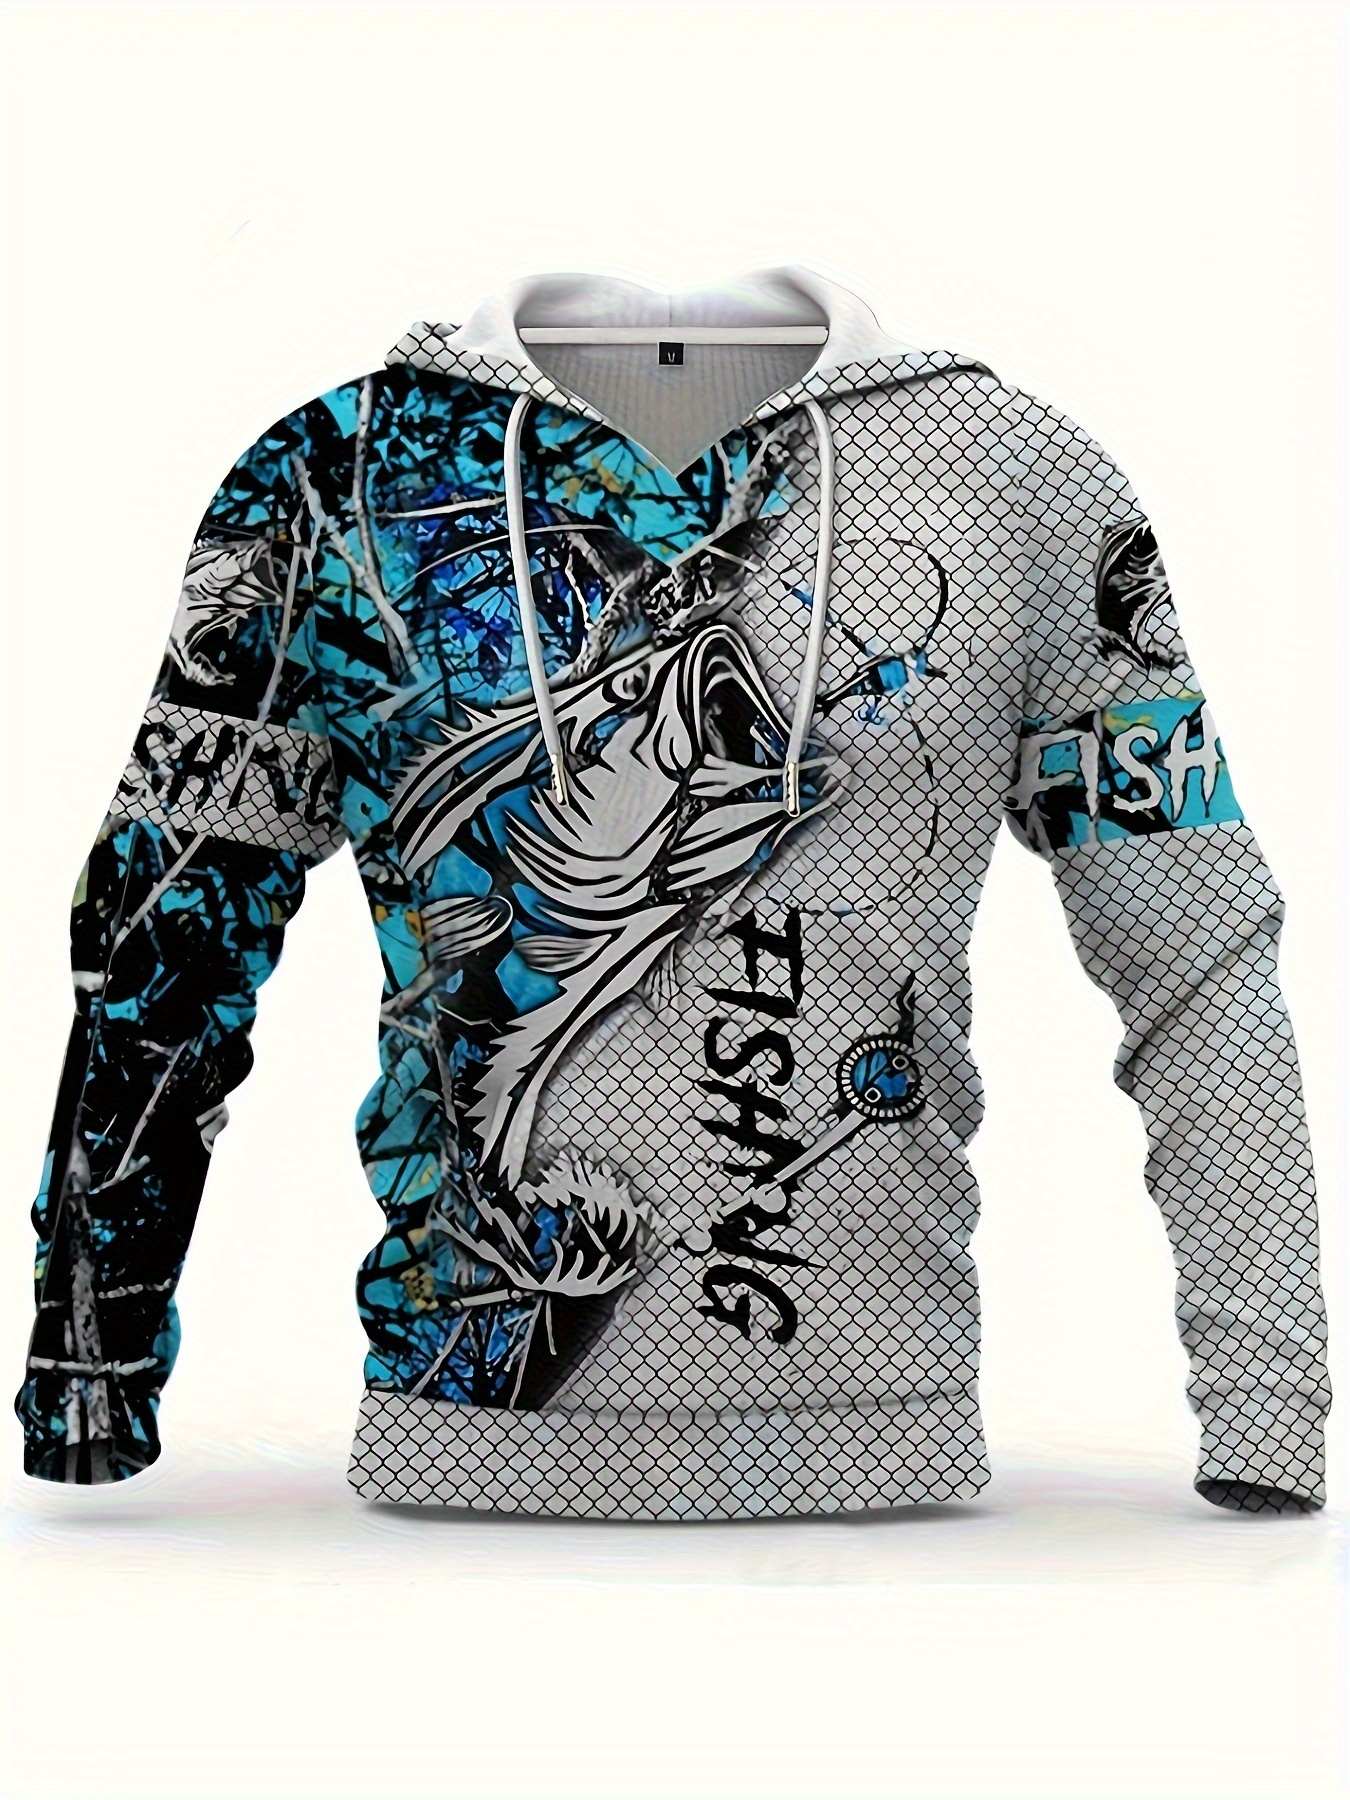 Men's Casual Fishing Pattern 3D Print Hooded Sweatshirt, Fishing Hoodies For Men,men Sweatshirt,Sports & Outdoors